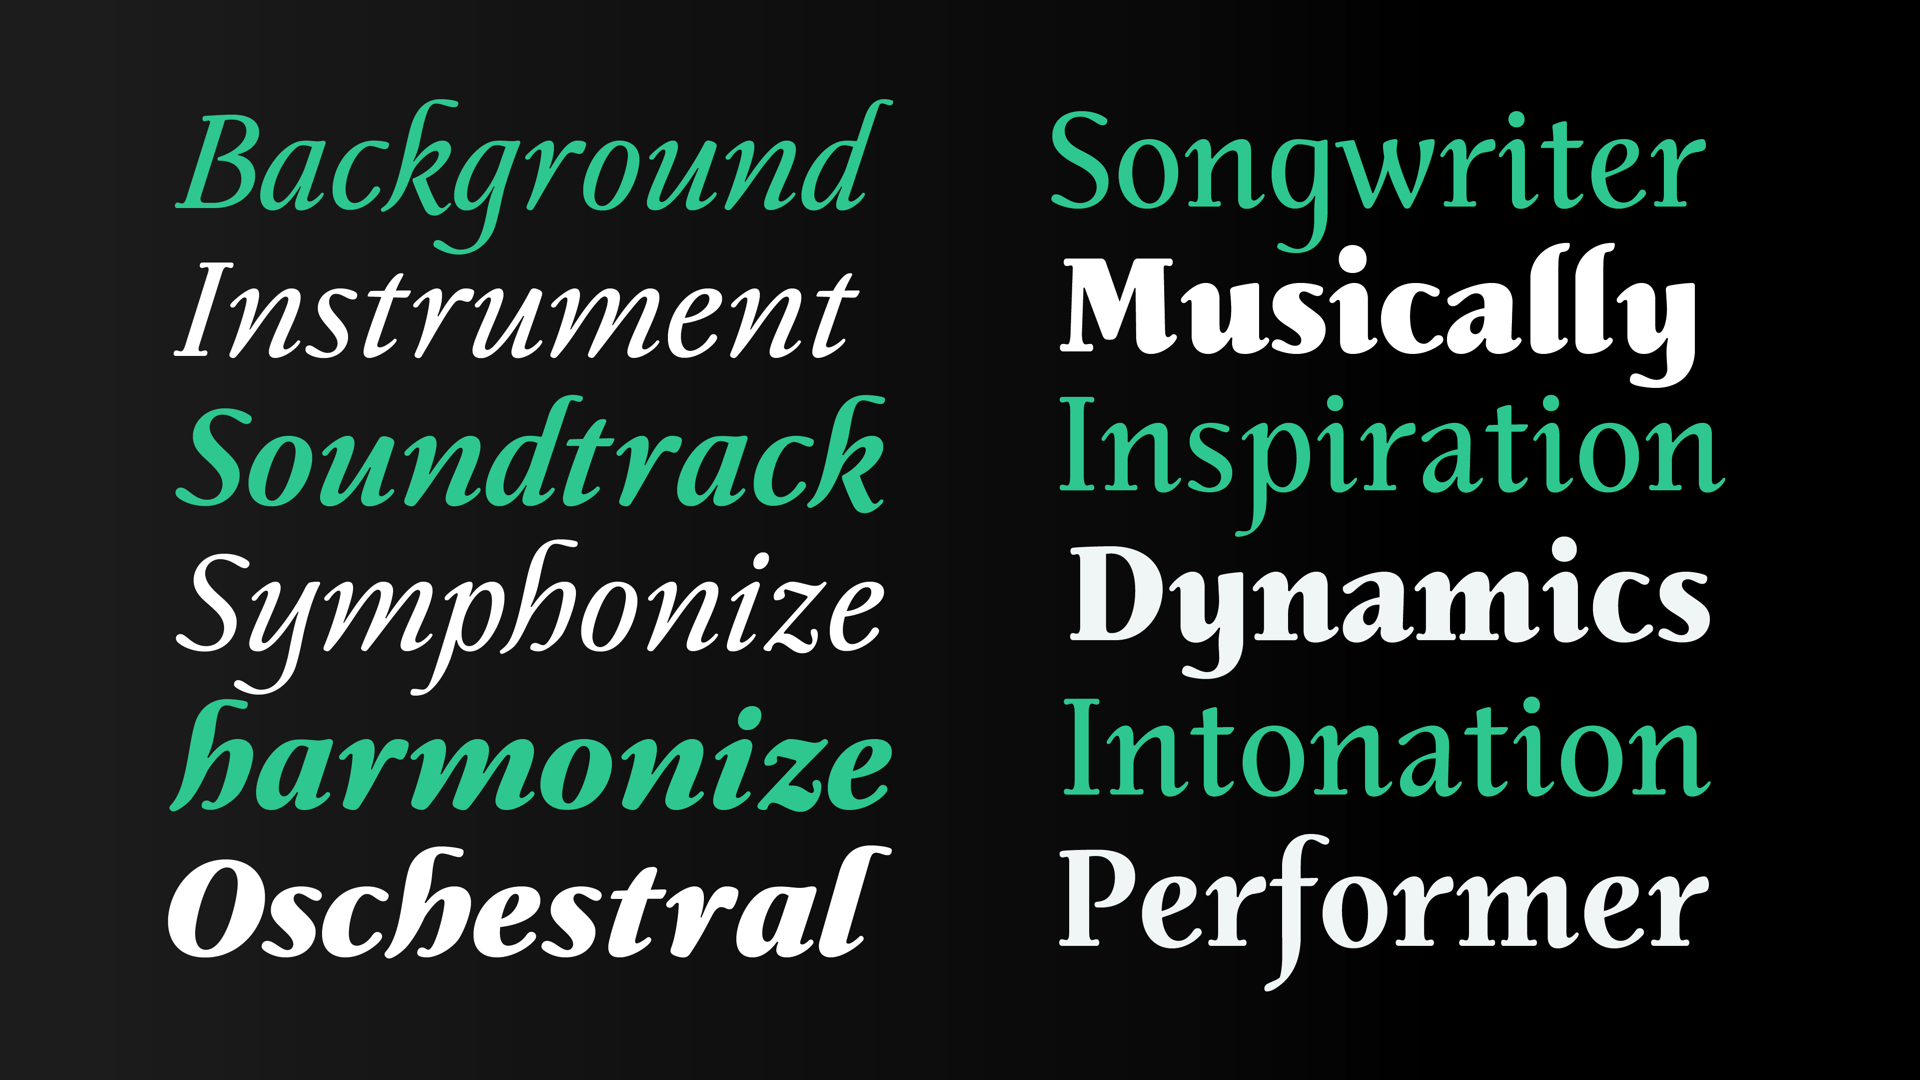 Words related to music presented in the different styles and weights of the type family.